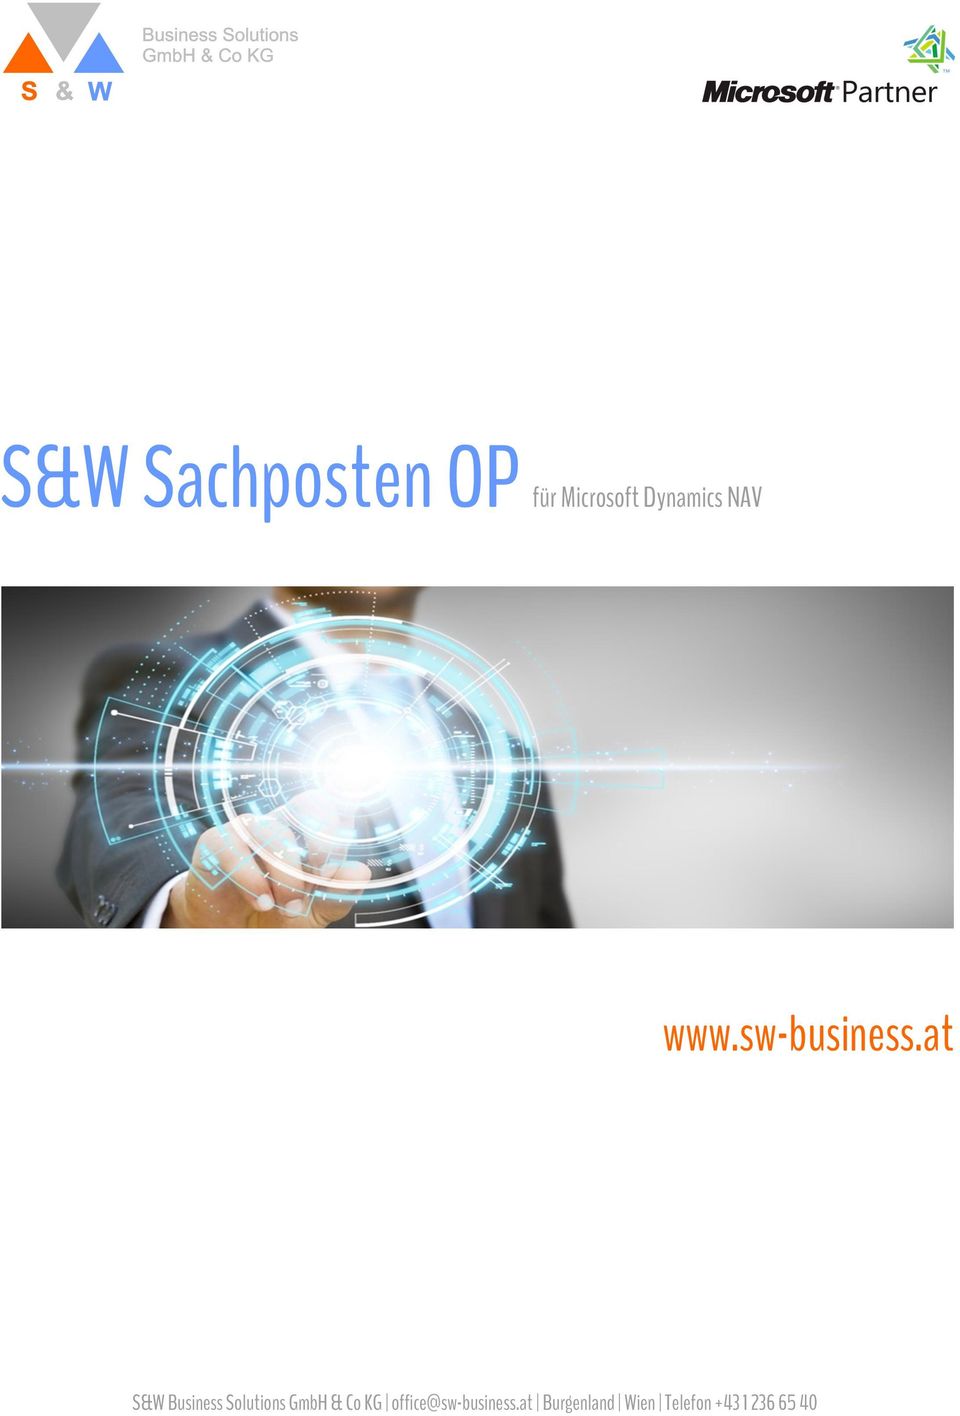 at S&W Business Solutions GmbH & Co KG